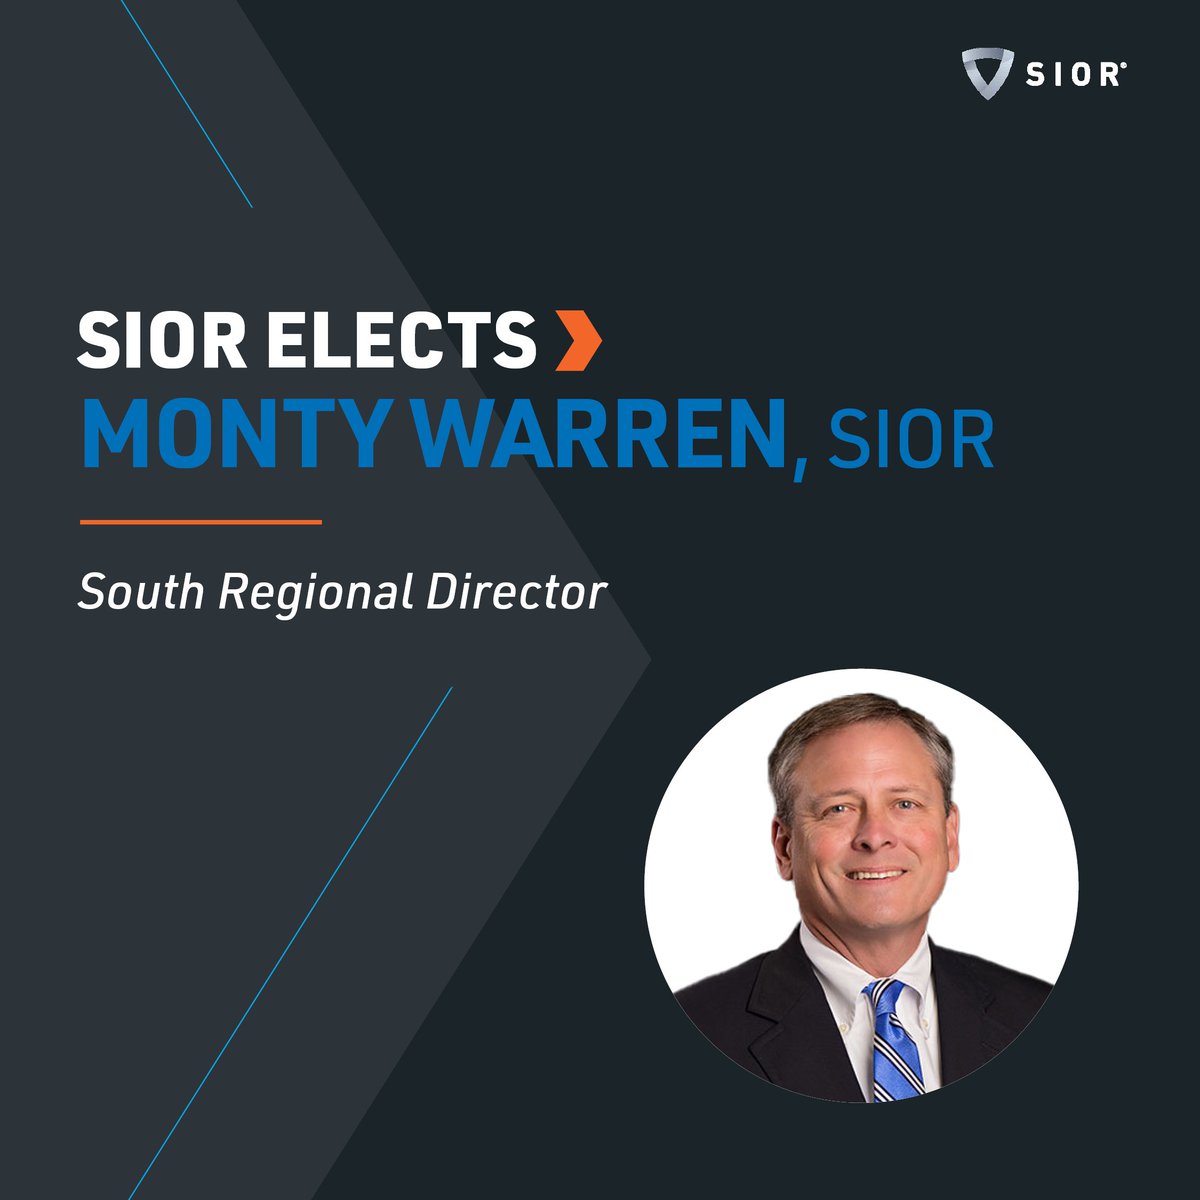 #SIOR is proud to announce that Monty Warren, SIOR, was elected to serve as SIOR's South Regional Director! Since becoming a member in 2009, Monty has consistently demonstrated his devotion to the organization & we look forward to seeing him serve his region in the same way!